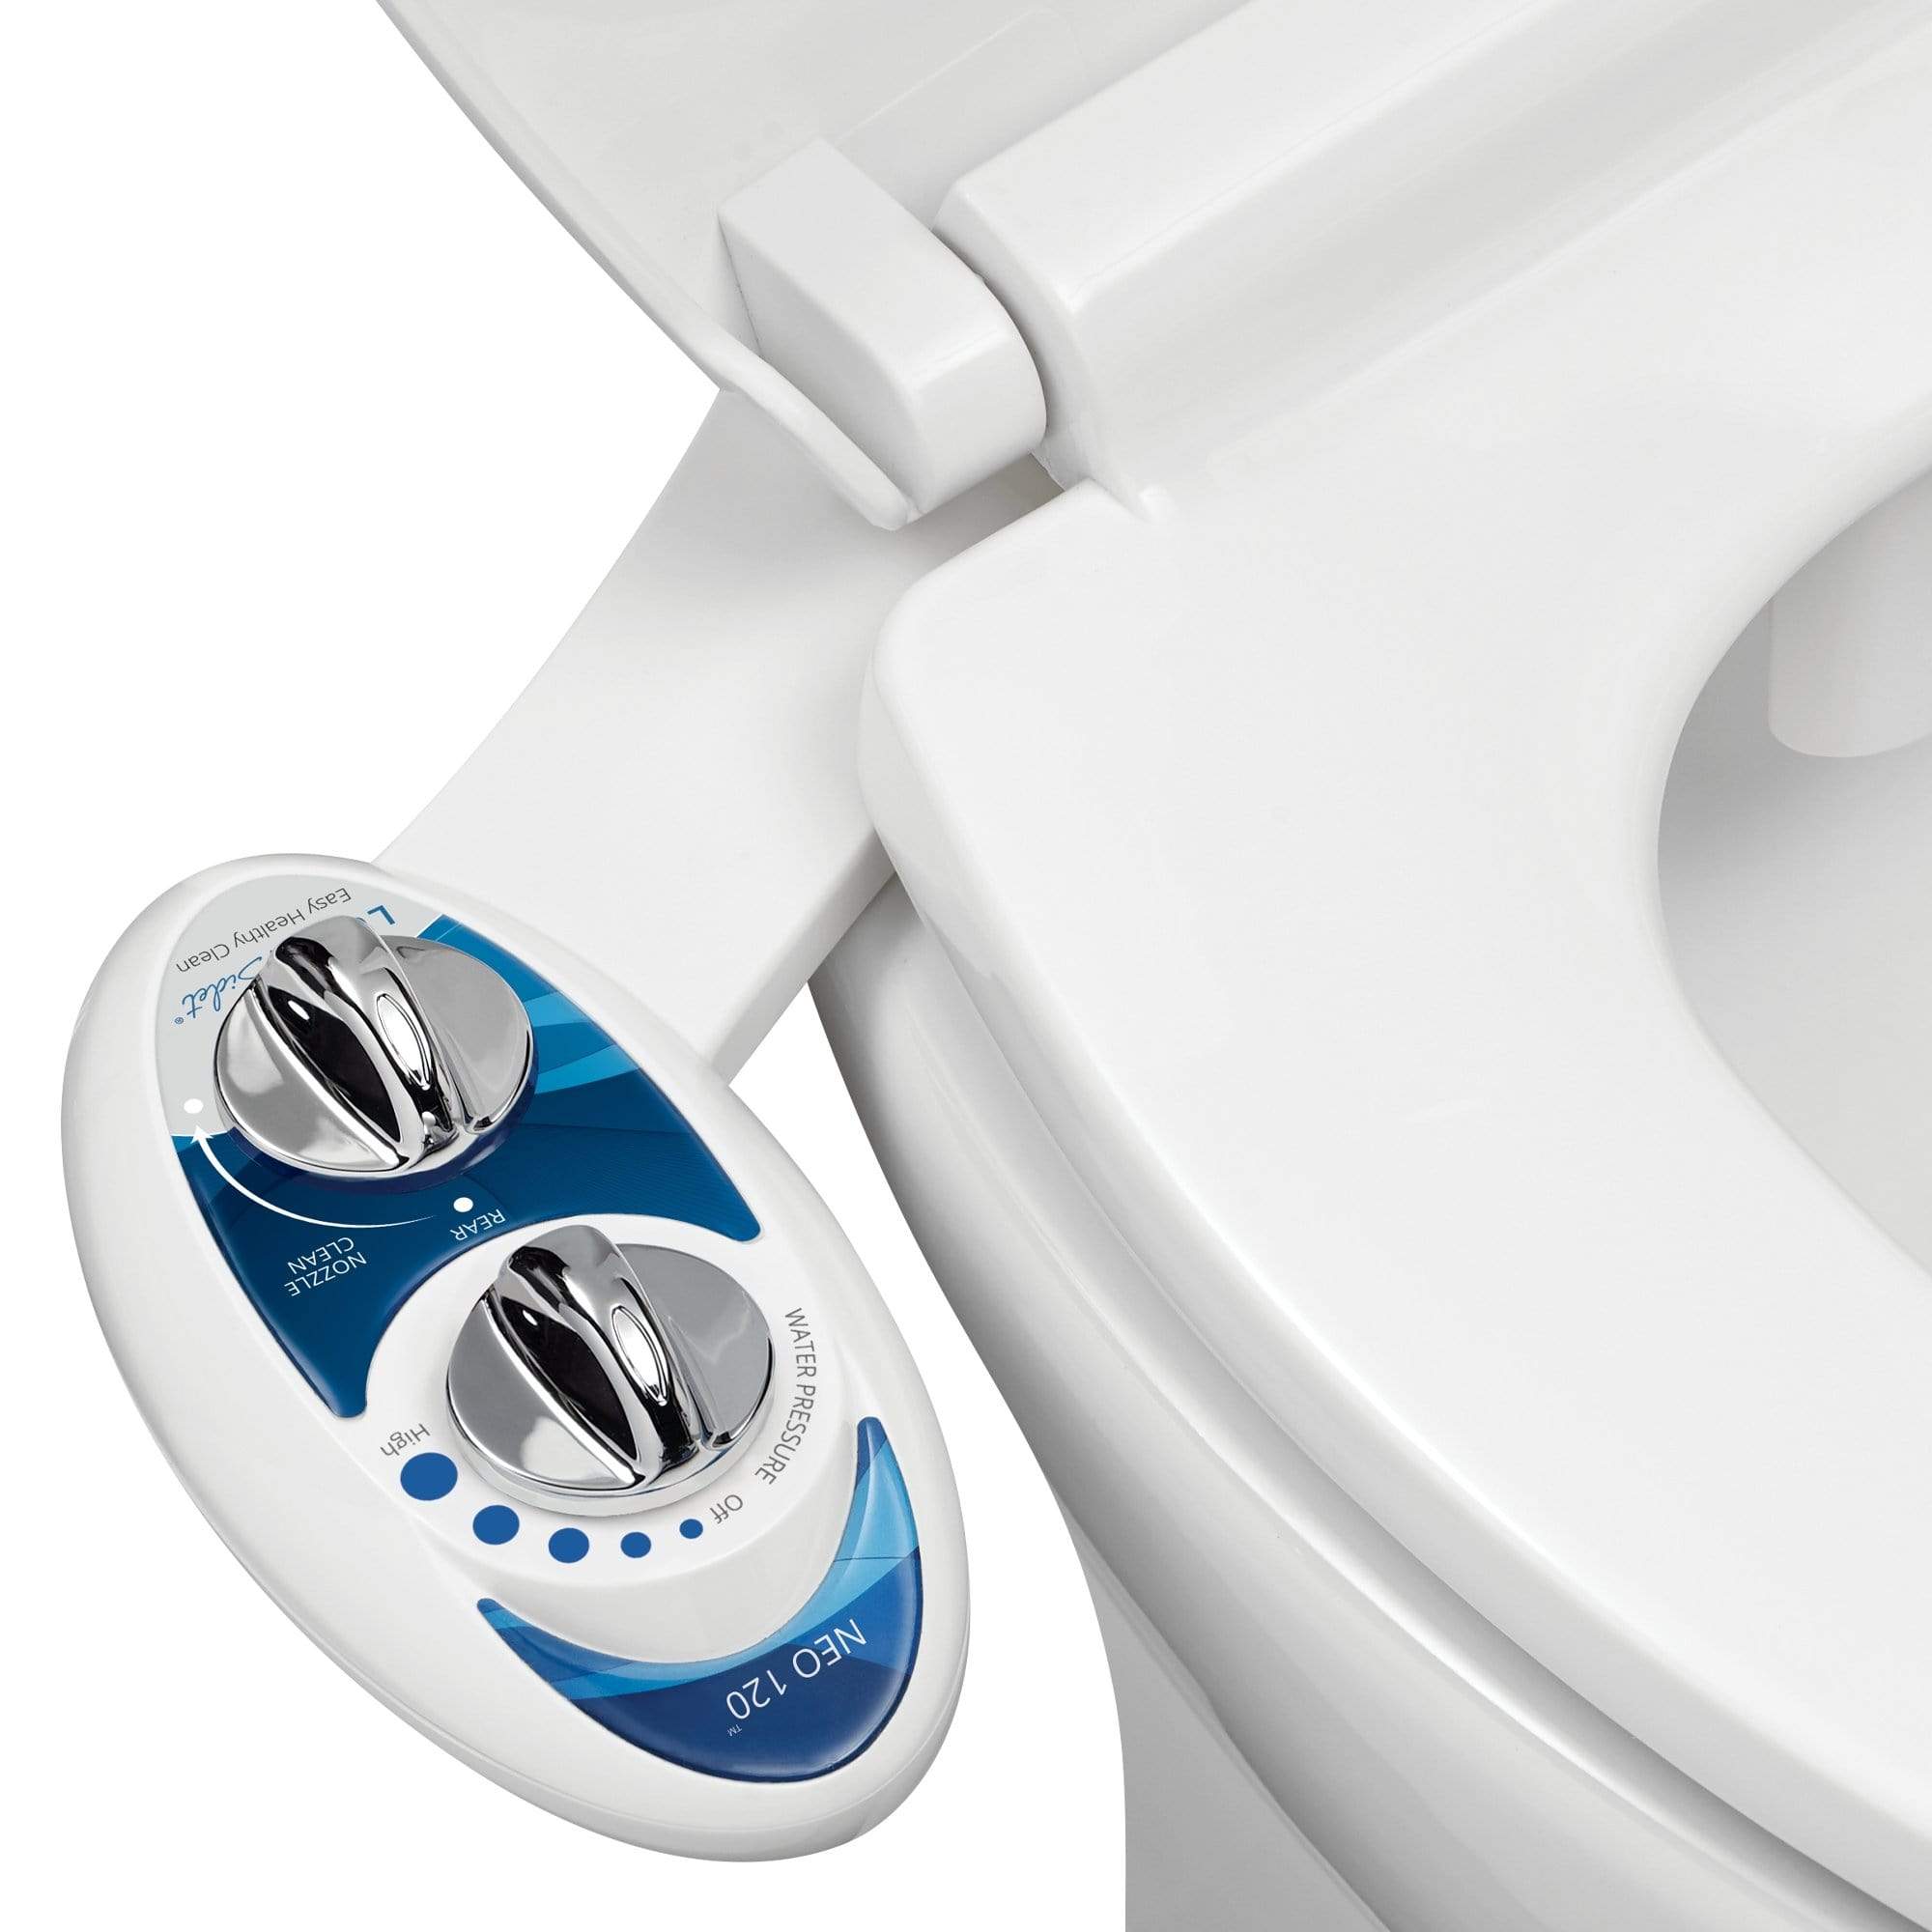 NEO 120: Imperfect Packaging - NEO 120 Blue installed on a toilet, open lid